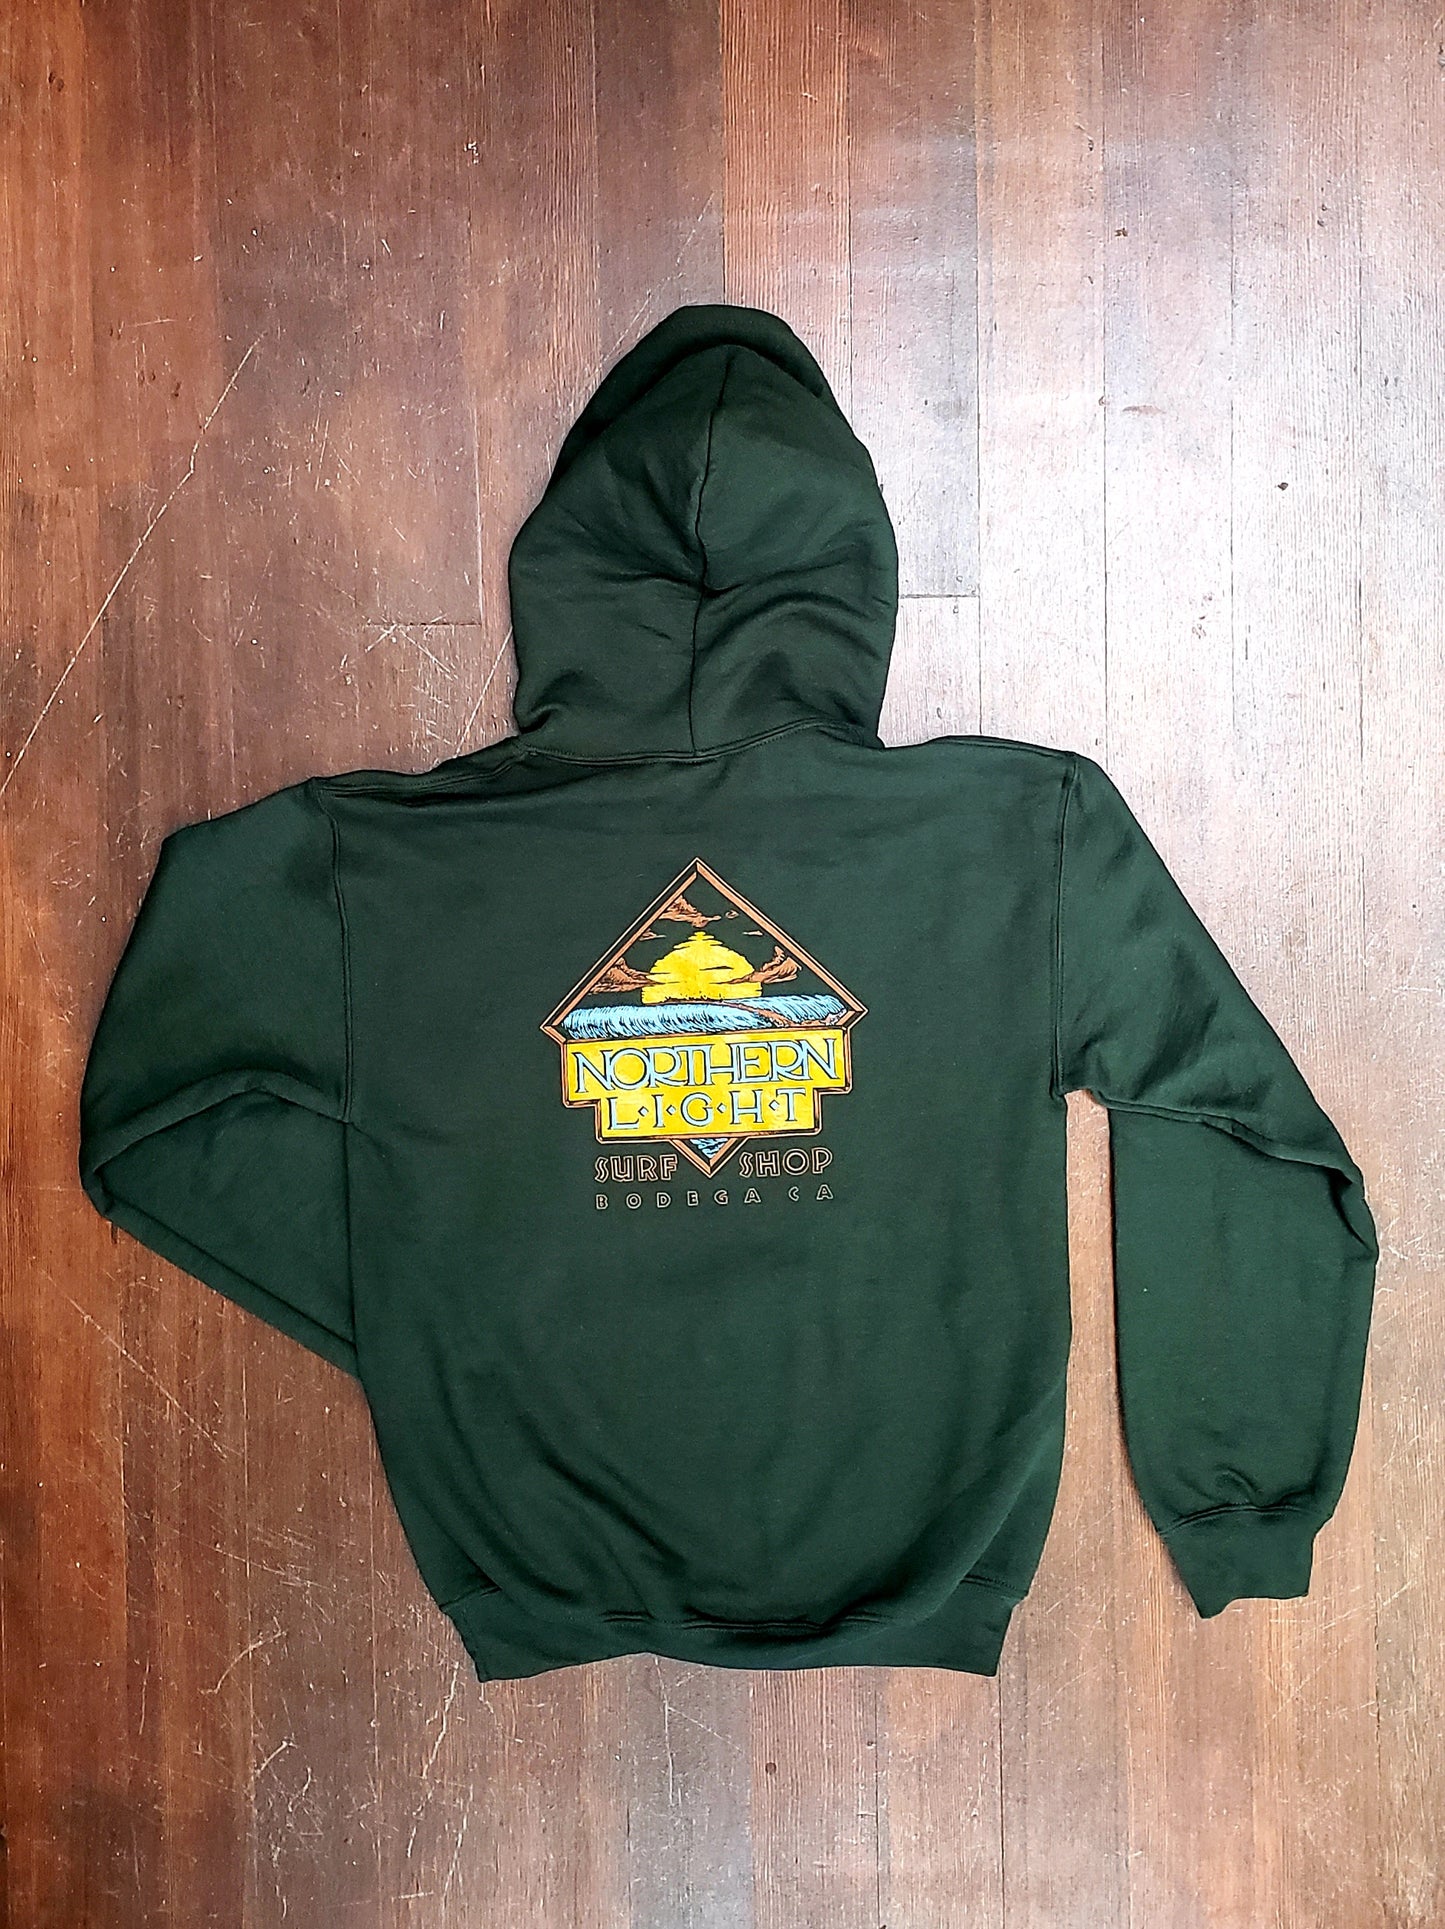 Classic surf logo hoodie in green